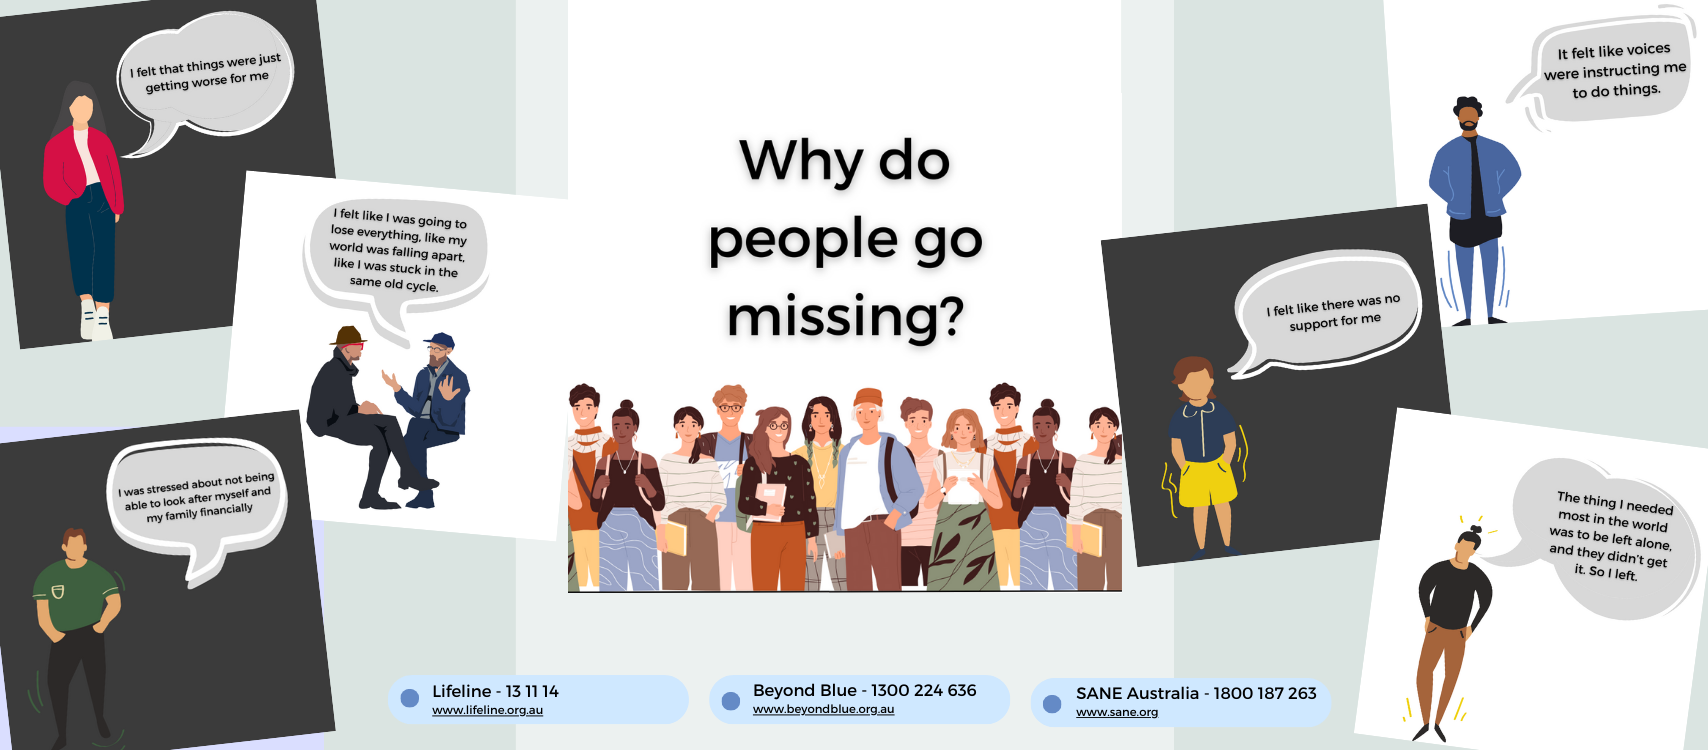 Collection of cartoon images with speech bubbles about why people go missing